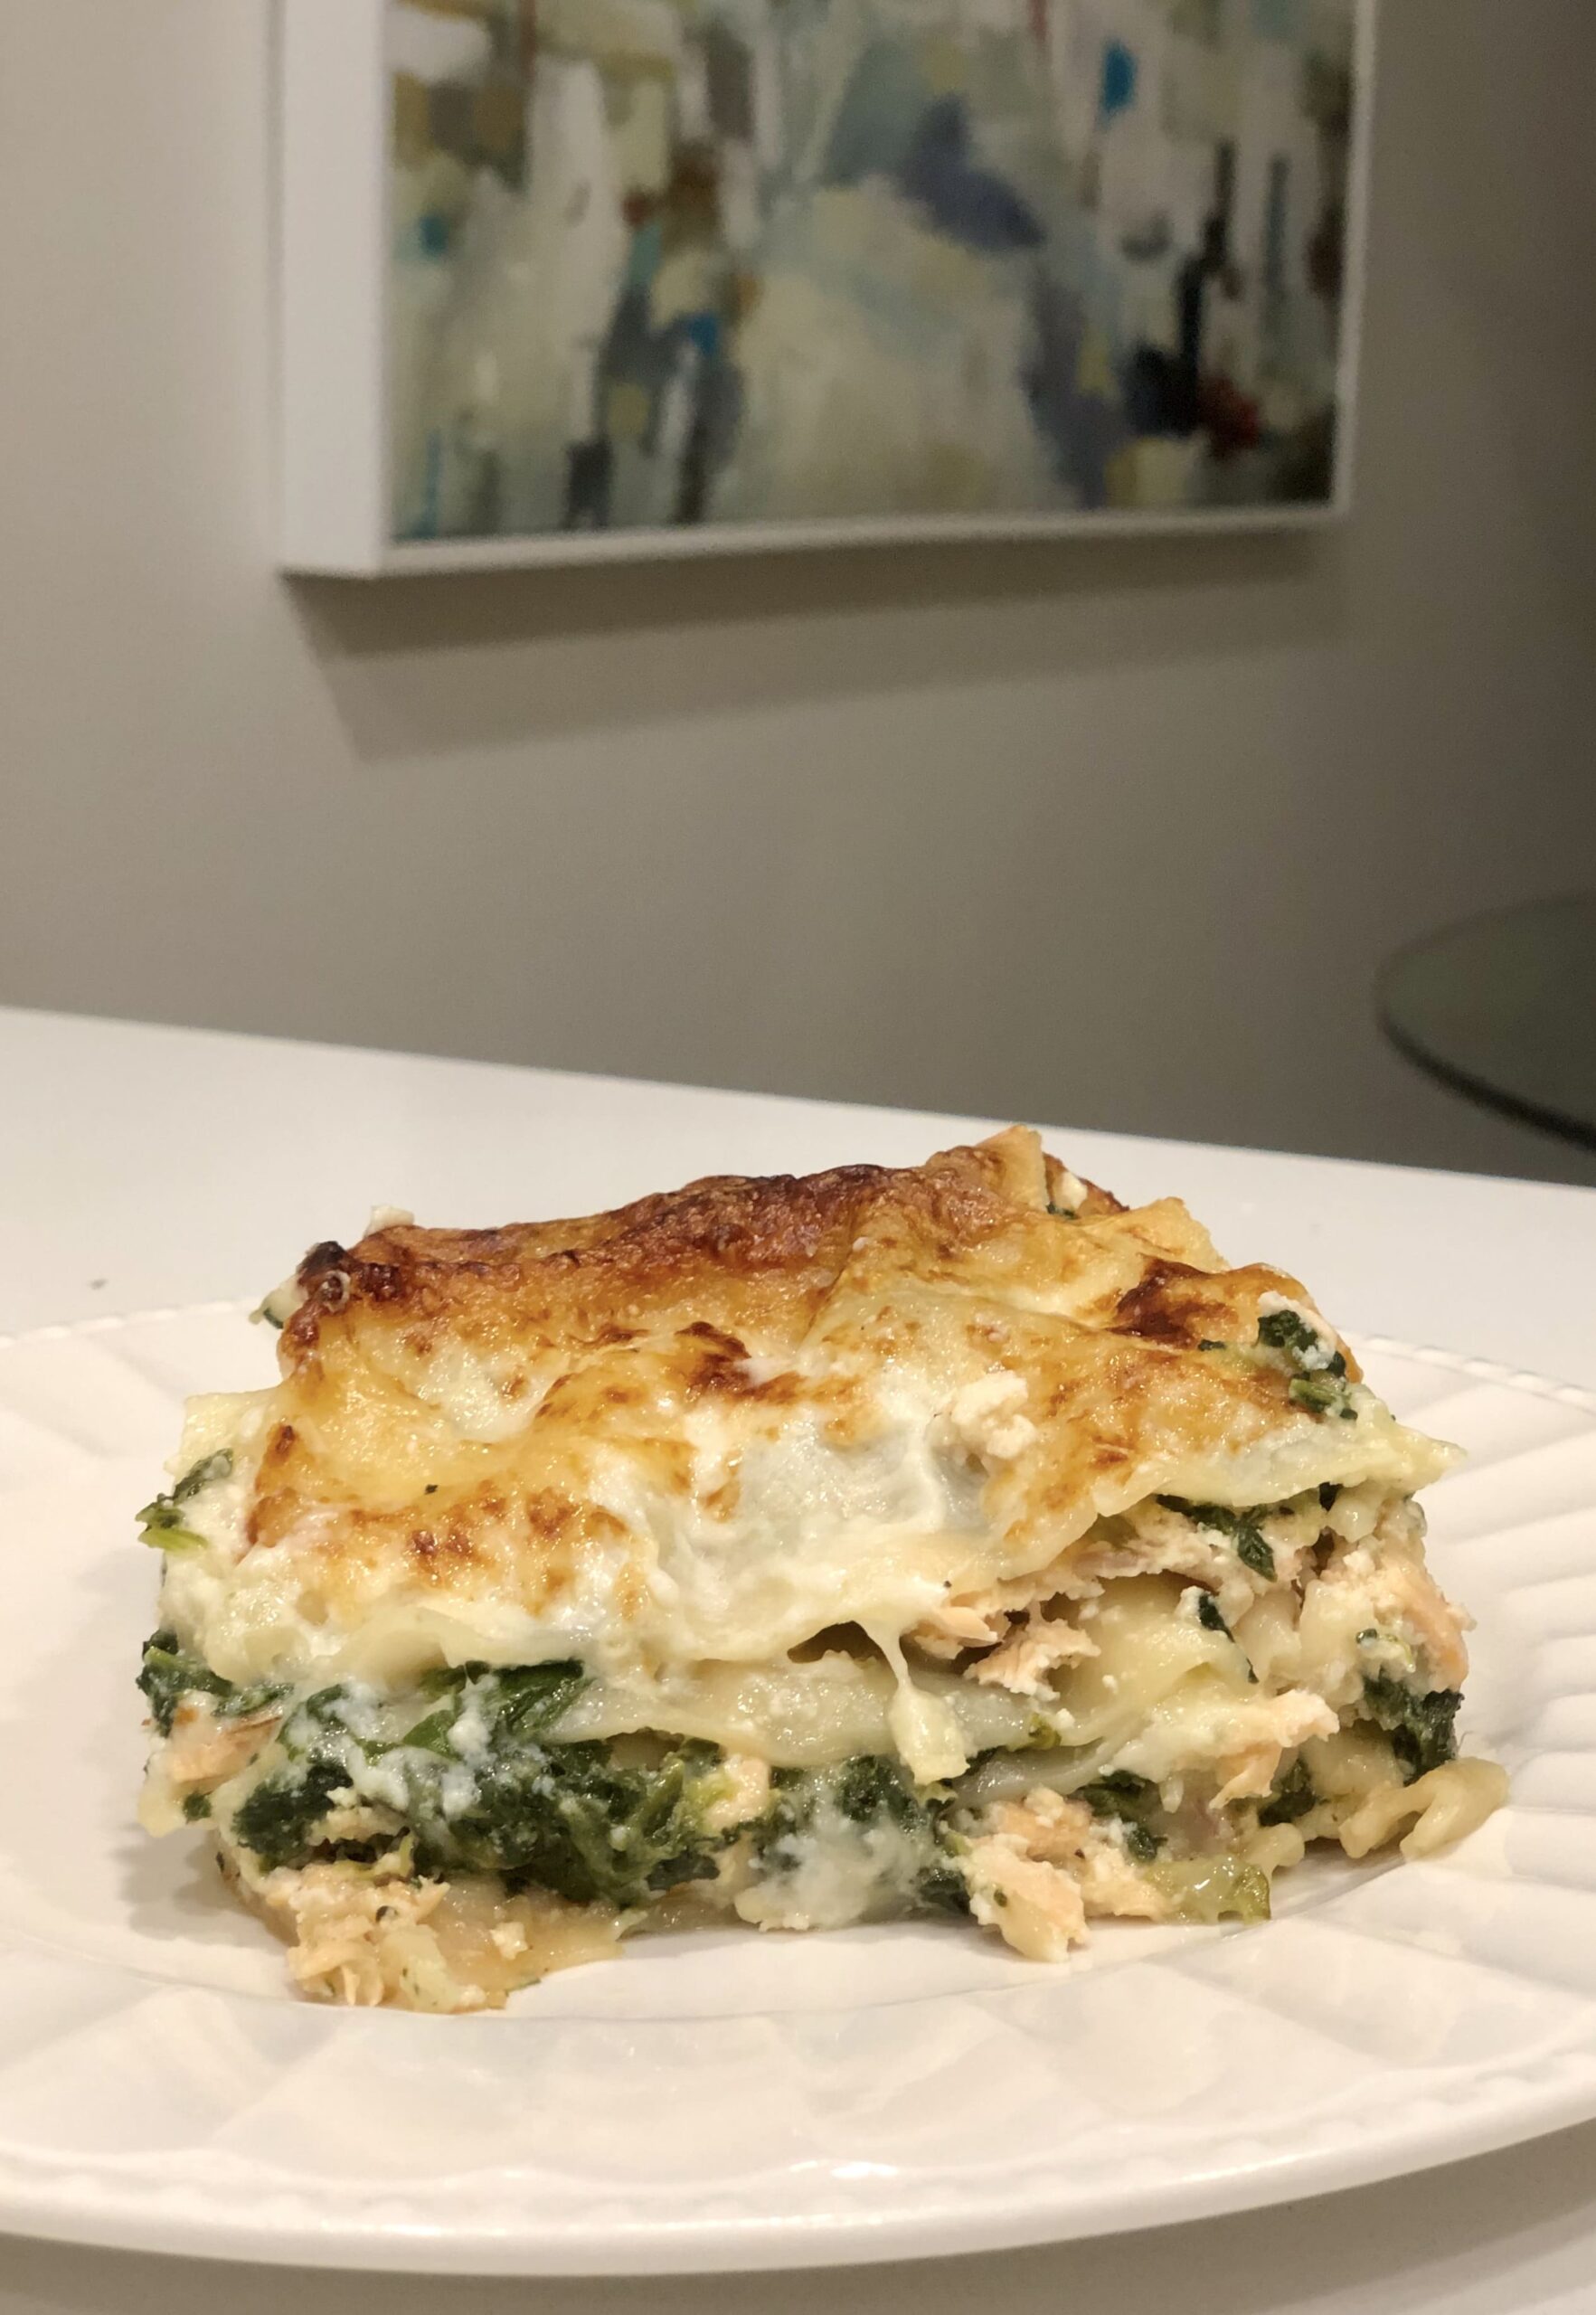 Salmon Lasagna With A Butternut Squash Option - BELGIAN FOODIE